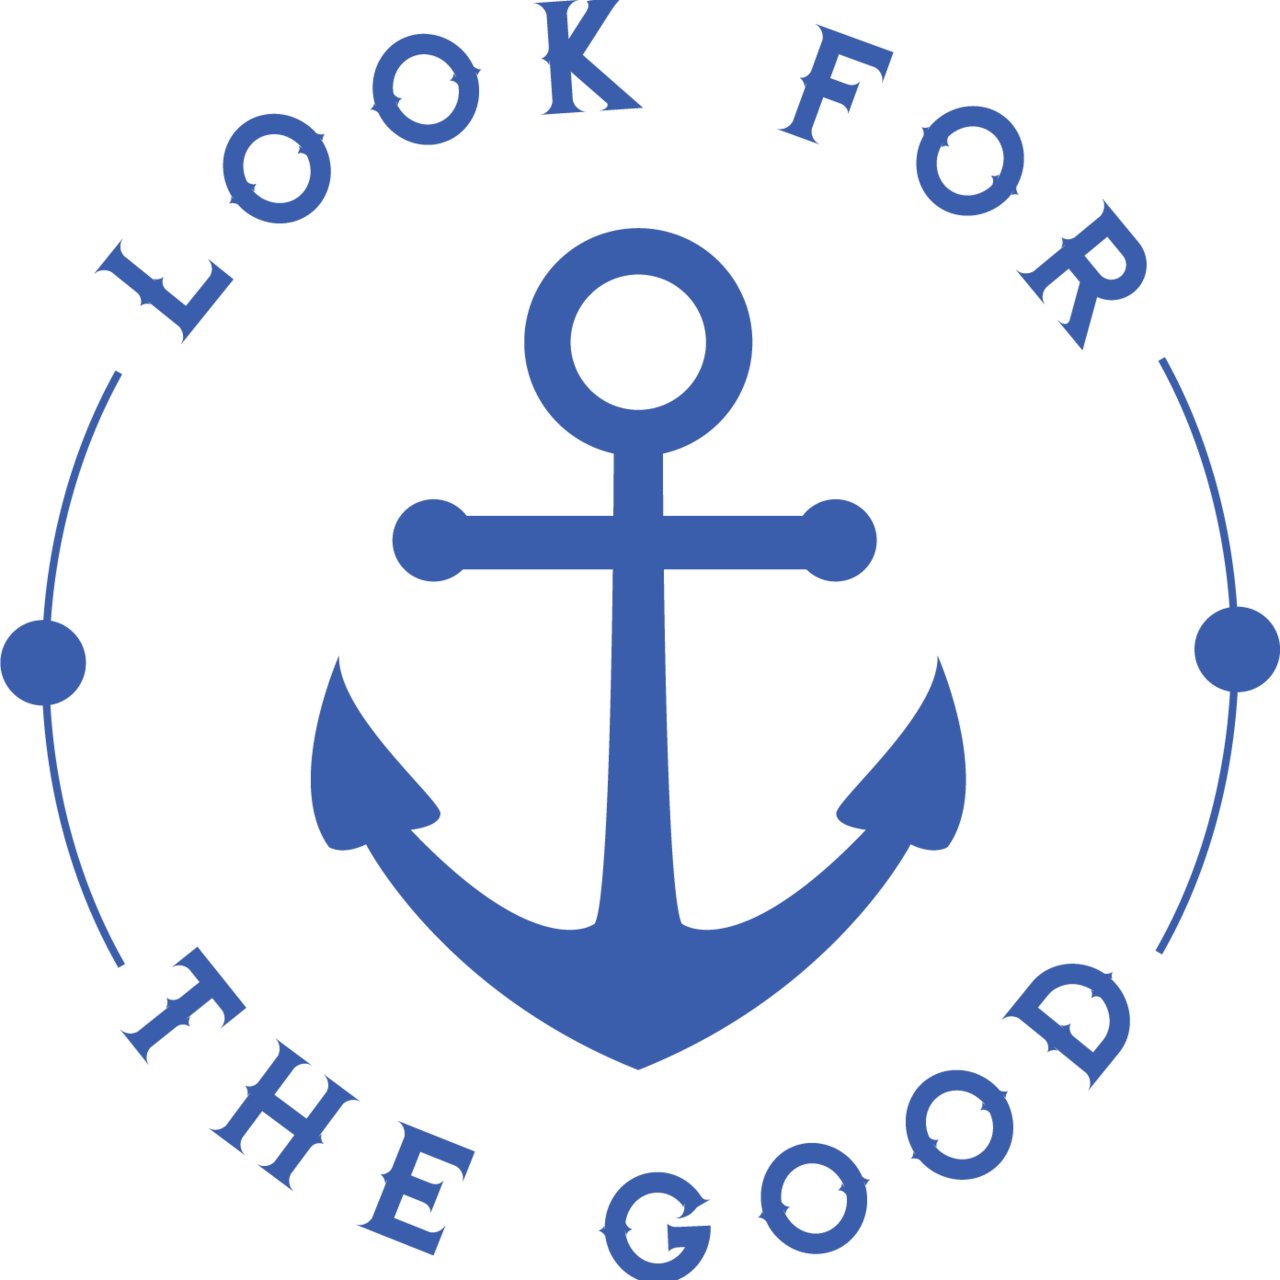 Look for the Good